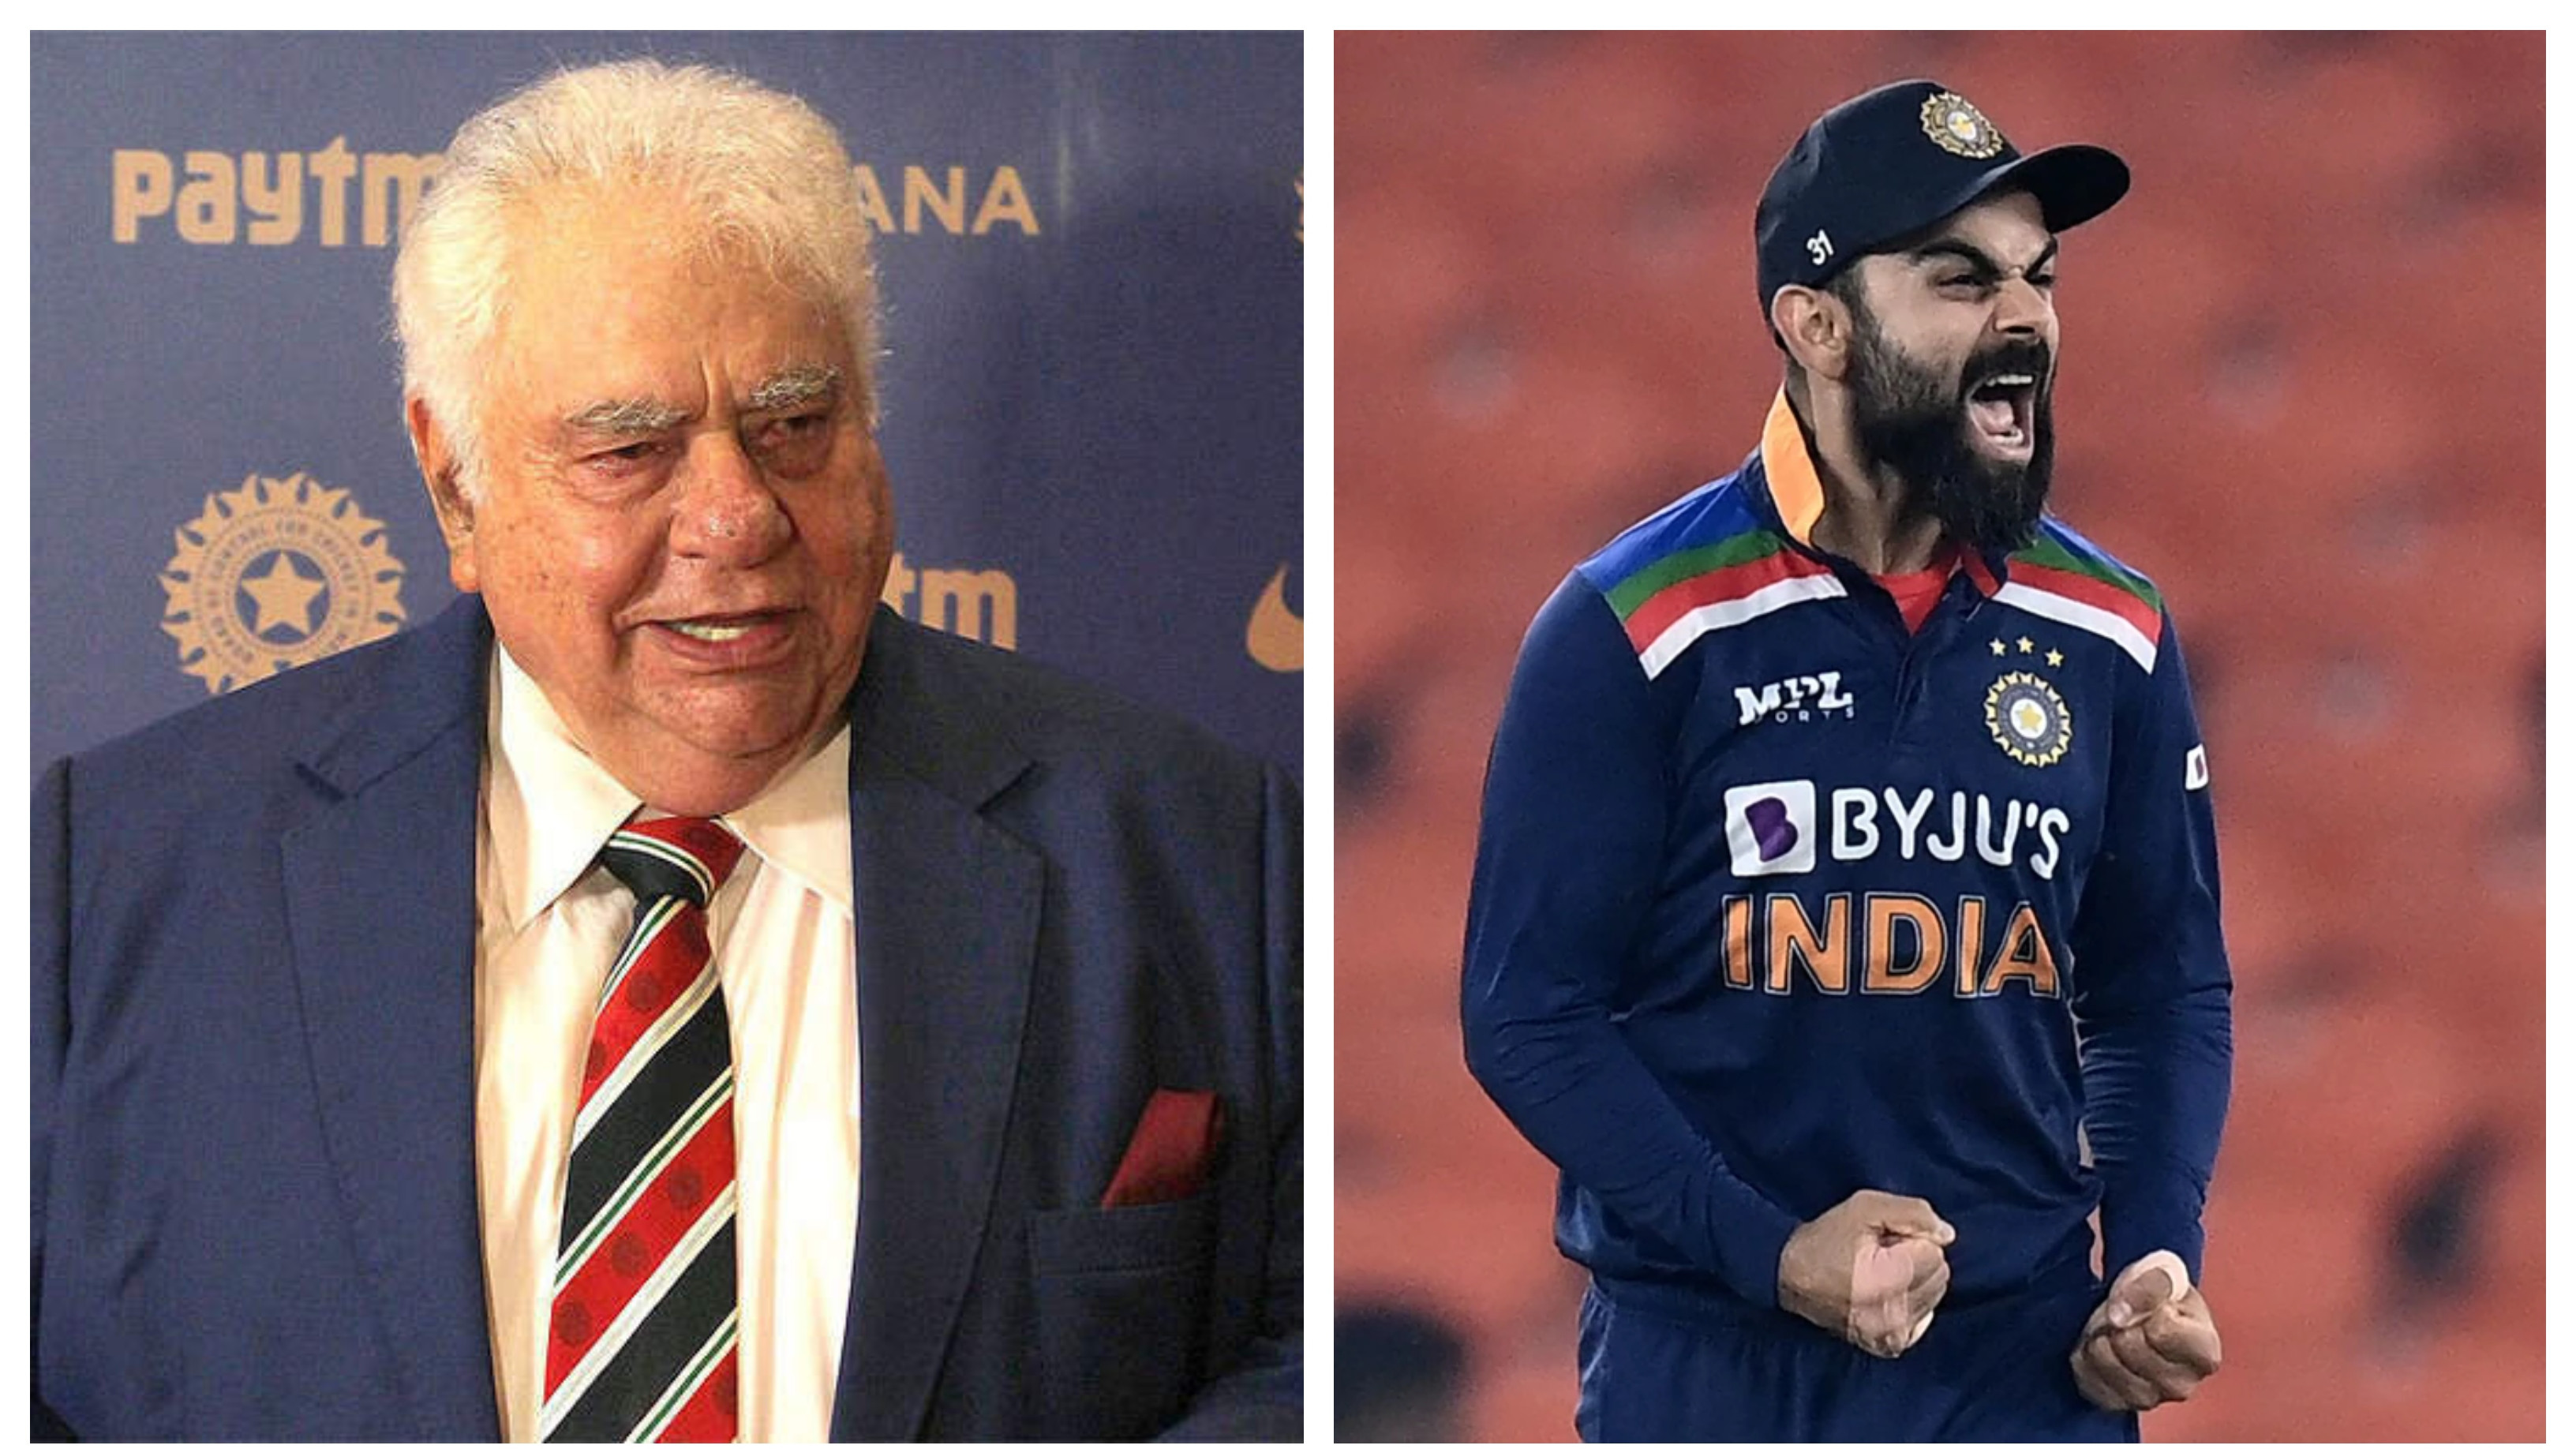 T20 World Cup 2021: ‘Virat will surely take India to the World Cup T20 win”, says Farokh Engineer